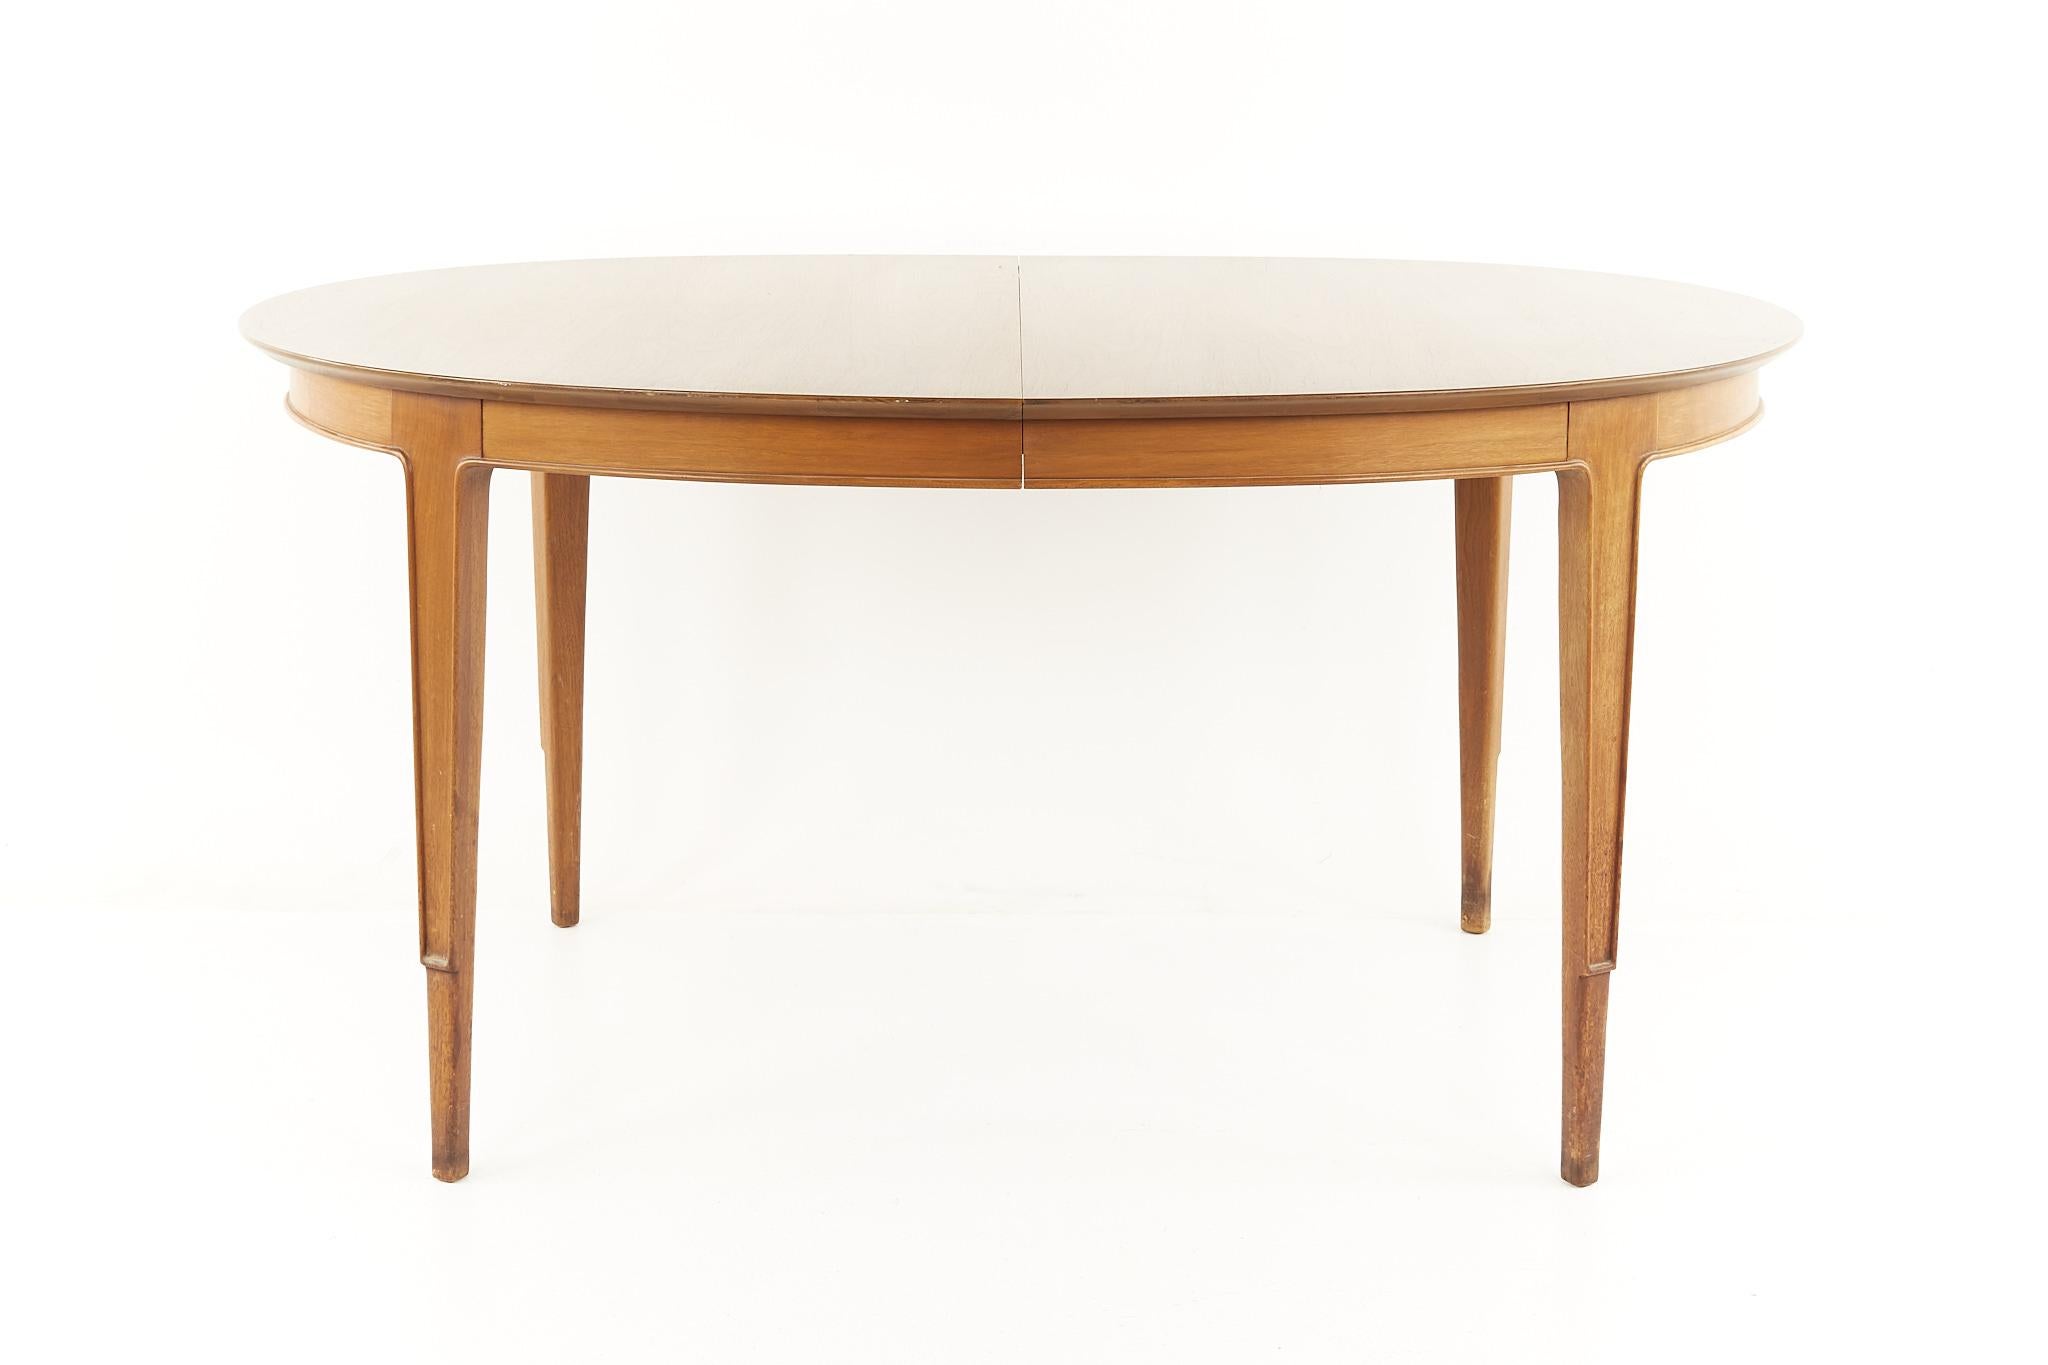 Mount Airy Janus mid century dining table with 2 leaves 

This table measures: 60 wide x 40 deep x 29.5 inches high, with a chair clearance of 26.75 inches high, each of the 2 leaves are 18 inches wide, making a maximum table width of 96